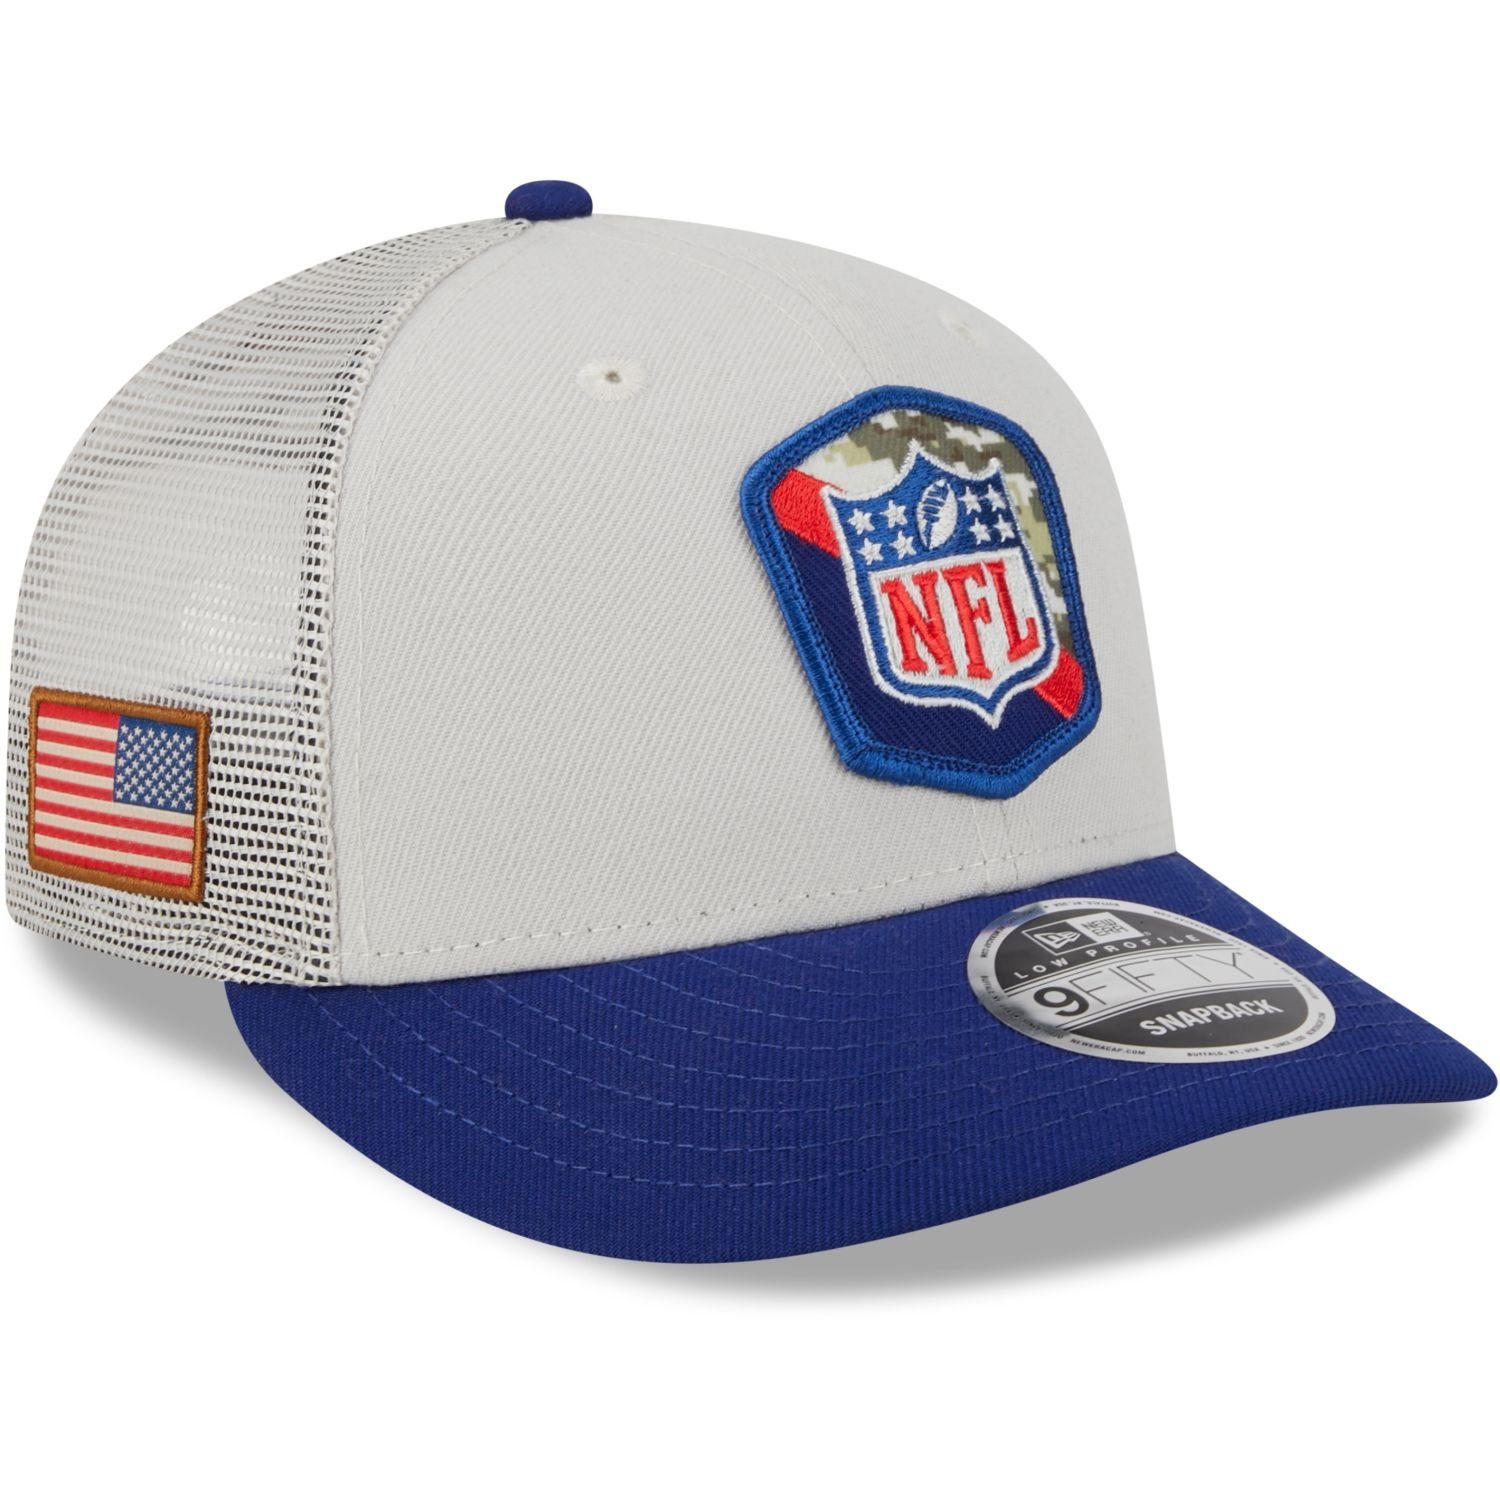 Snapback Cap Profile NFL Snap Era Service NFL to Salute New SHIELD Low 9Fifty